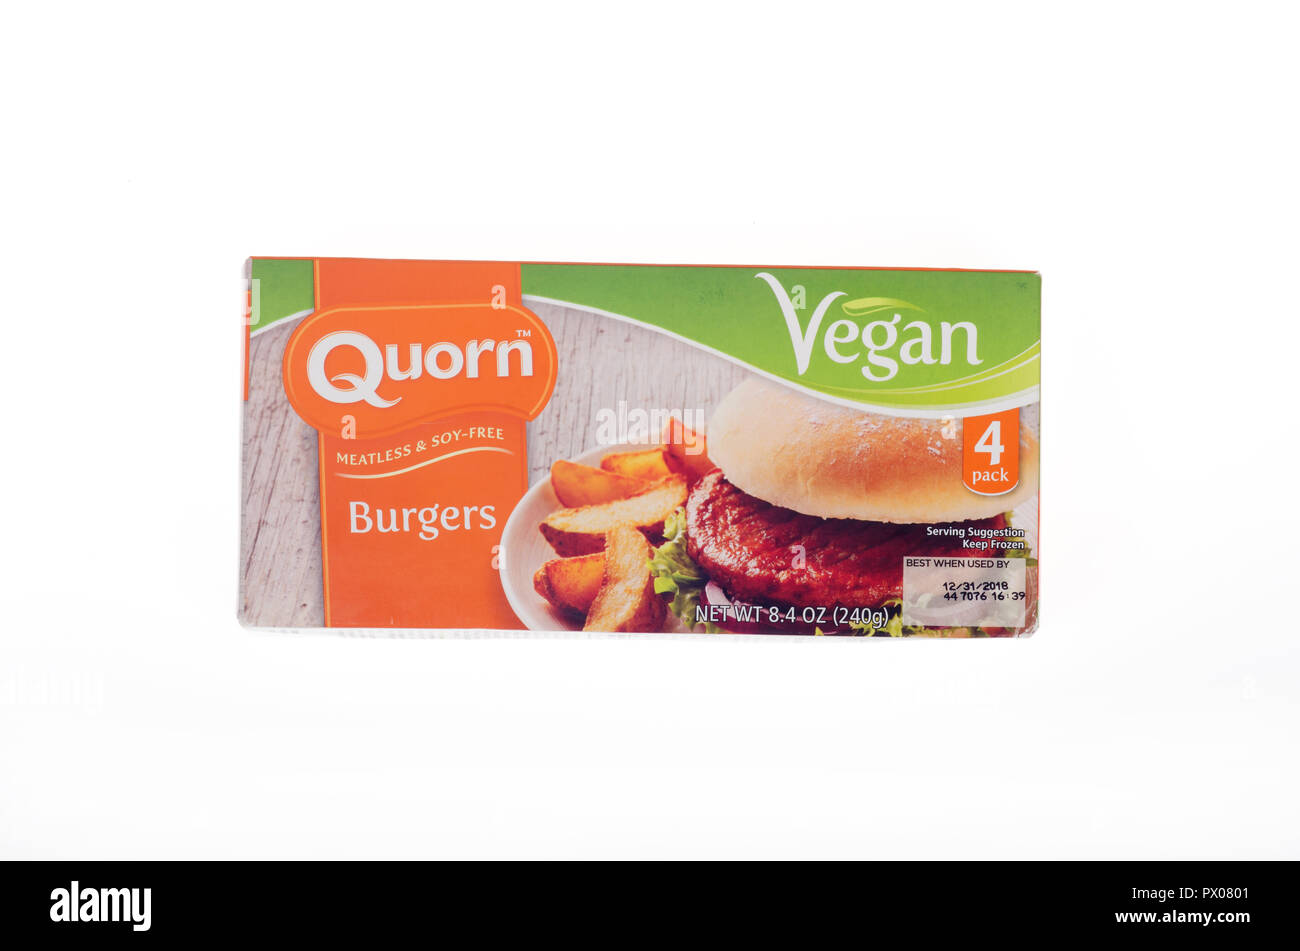 Box of Quorn Vegan Burgers which are meatless, soy-free and frozen Stock Photo